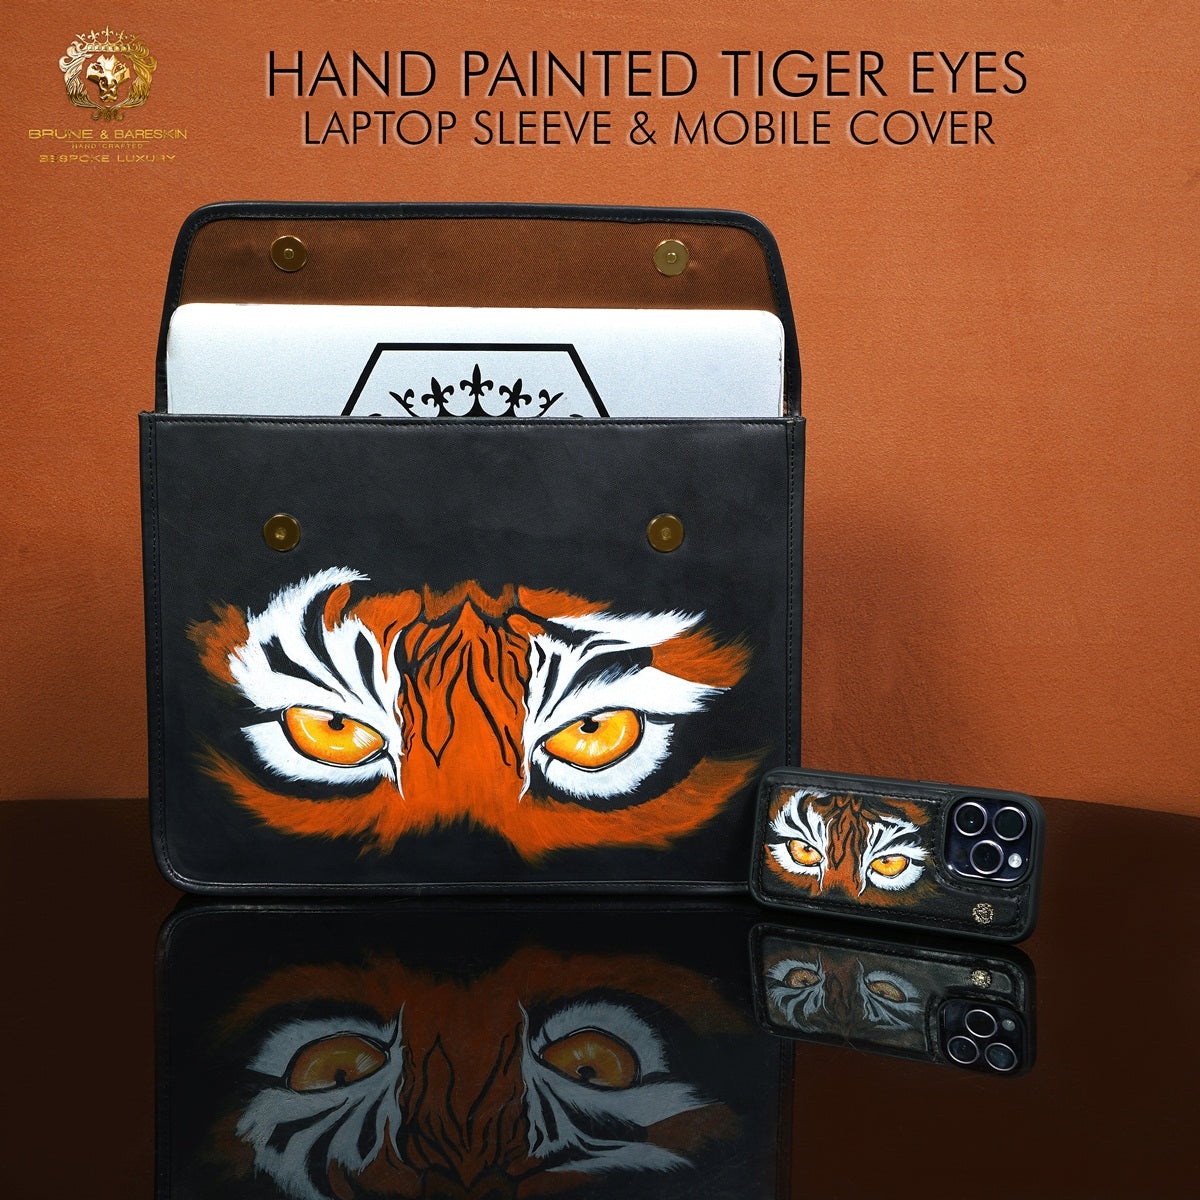 Personalized Combo of Laptop Sleeves & Mobile Cover with Hand-Painted Tiger Eyes